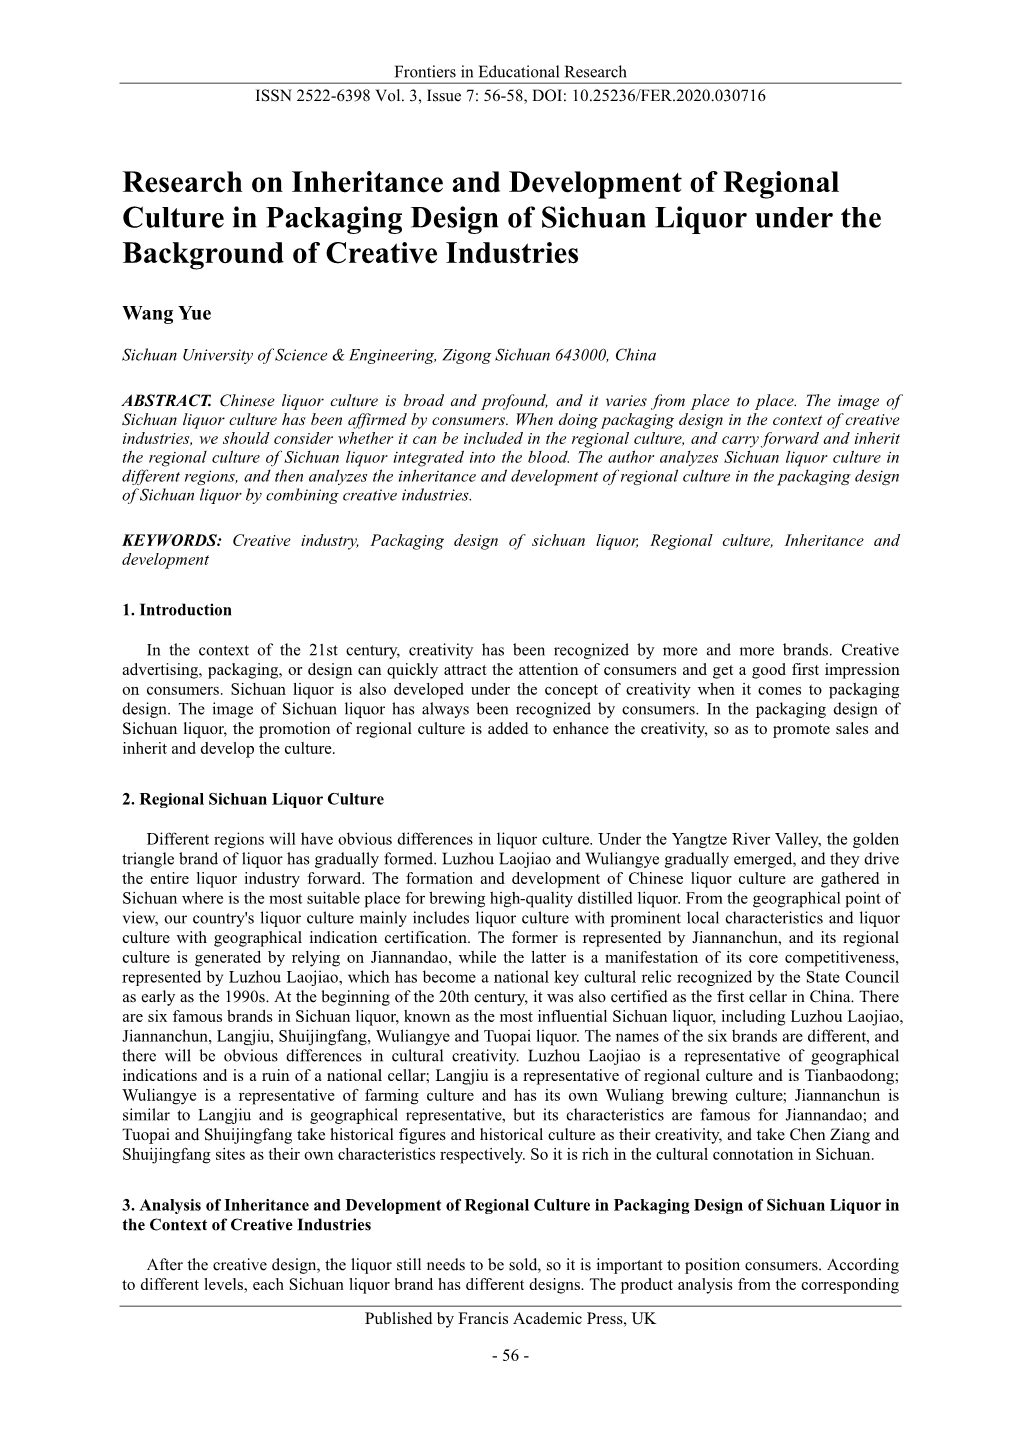 Research on Inheritance and Development of Regional Culture in Packaging Design of Sichuan Liquor Under the Background of Creative Industries